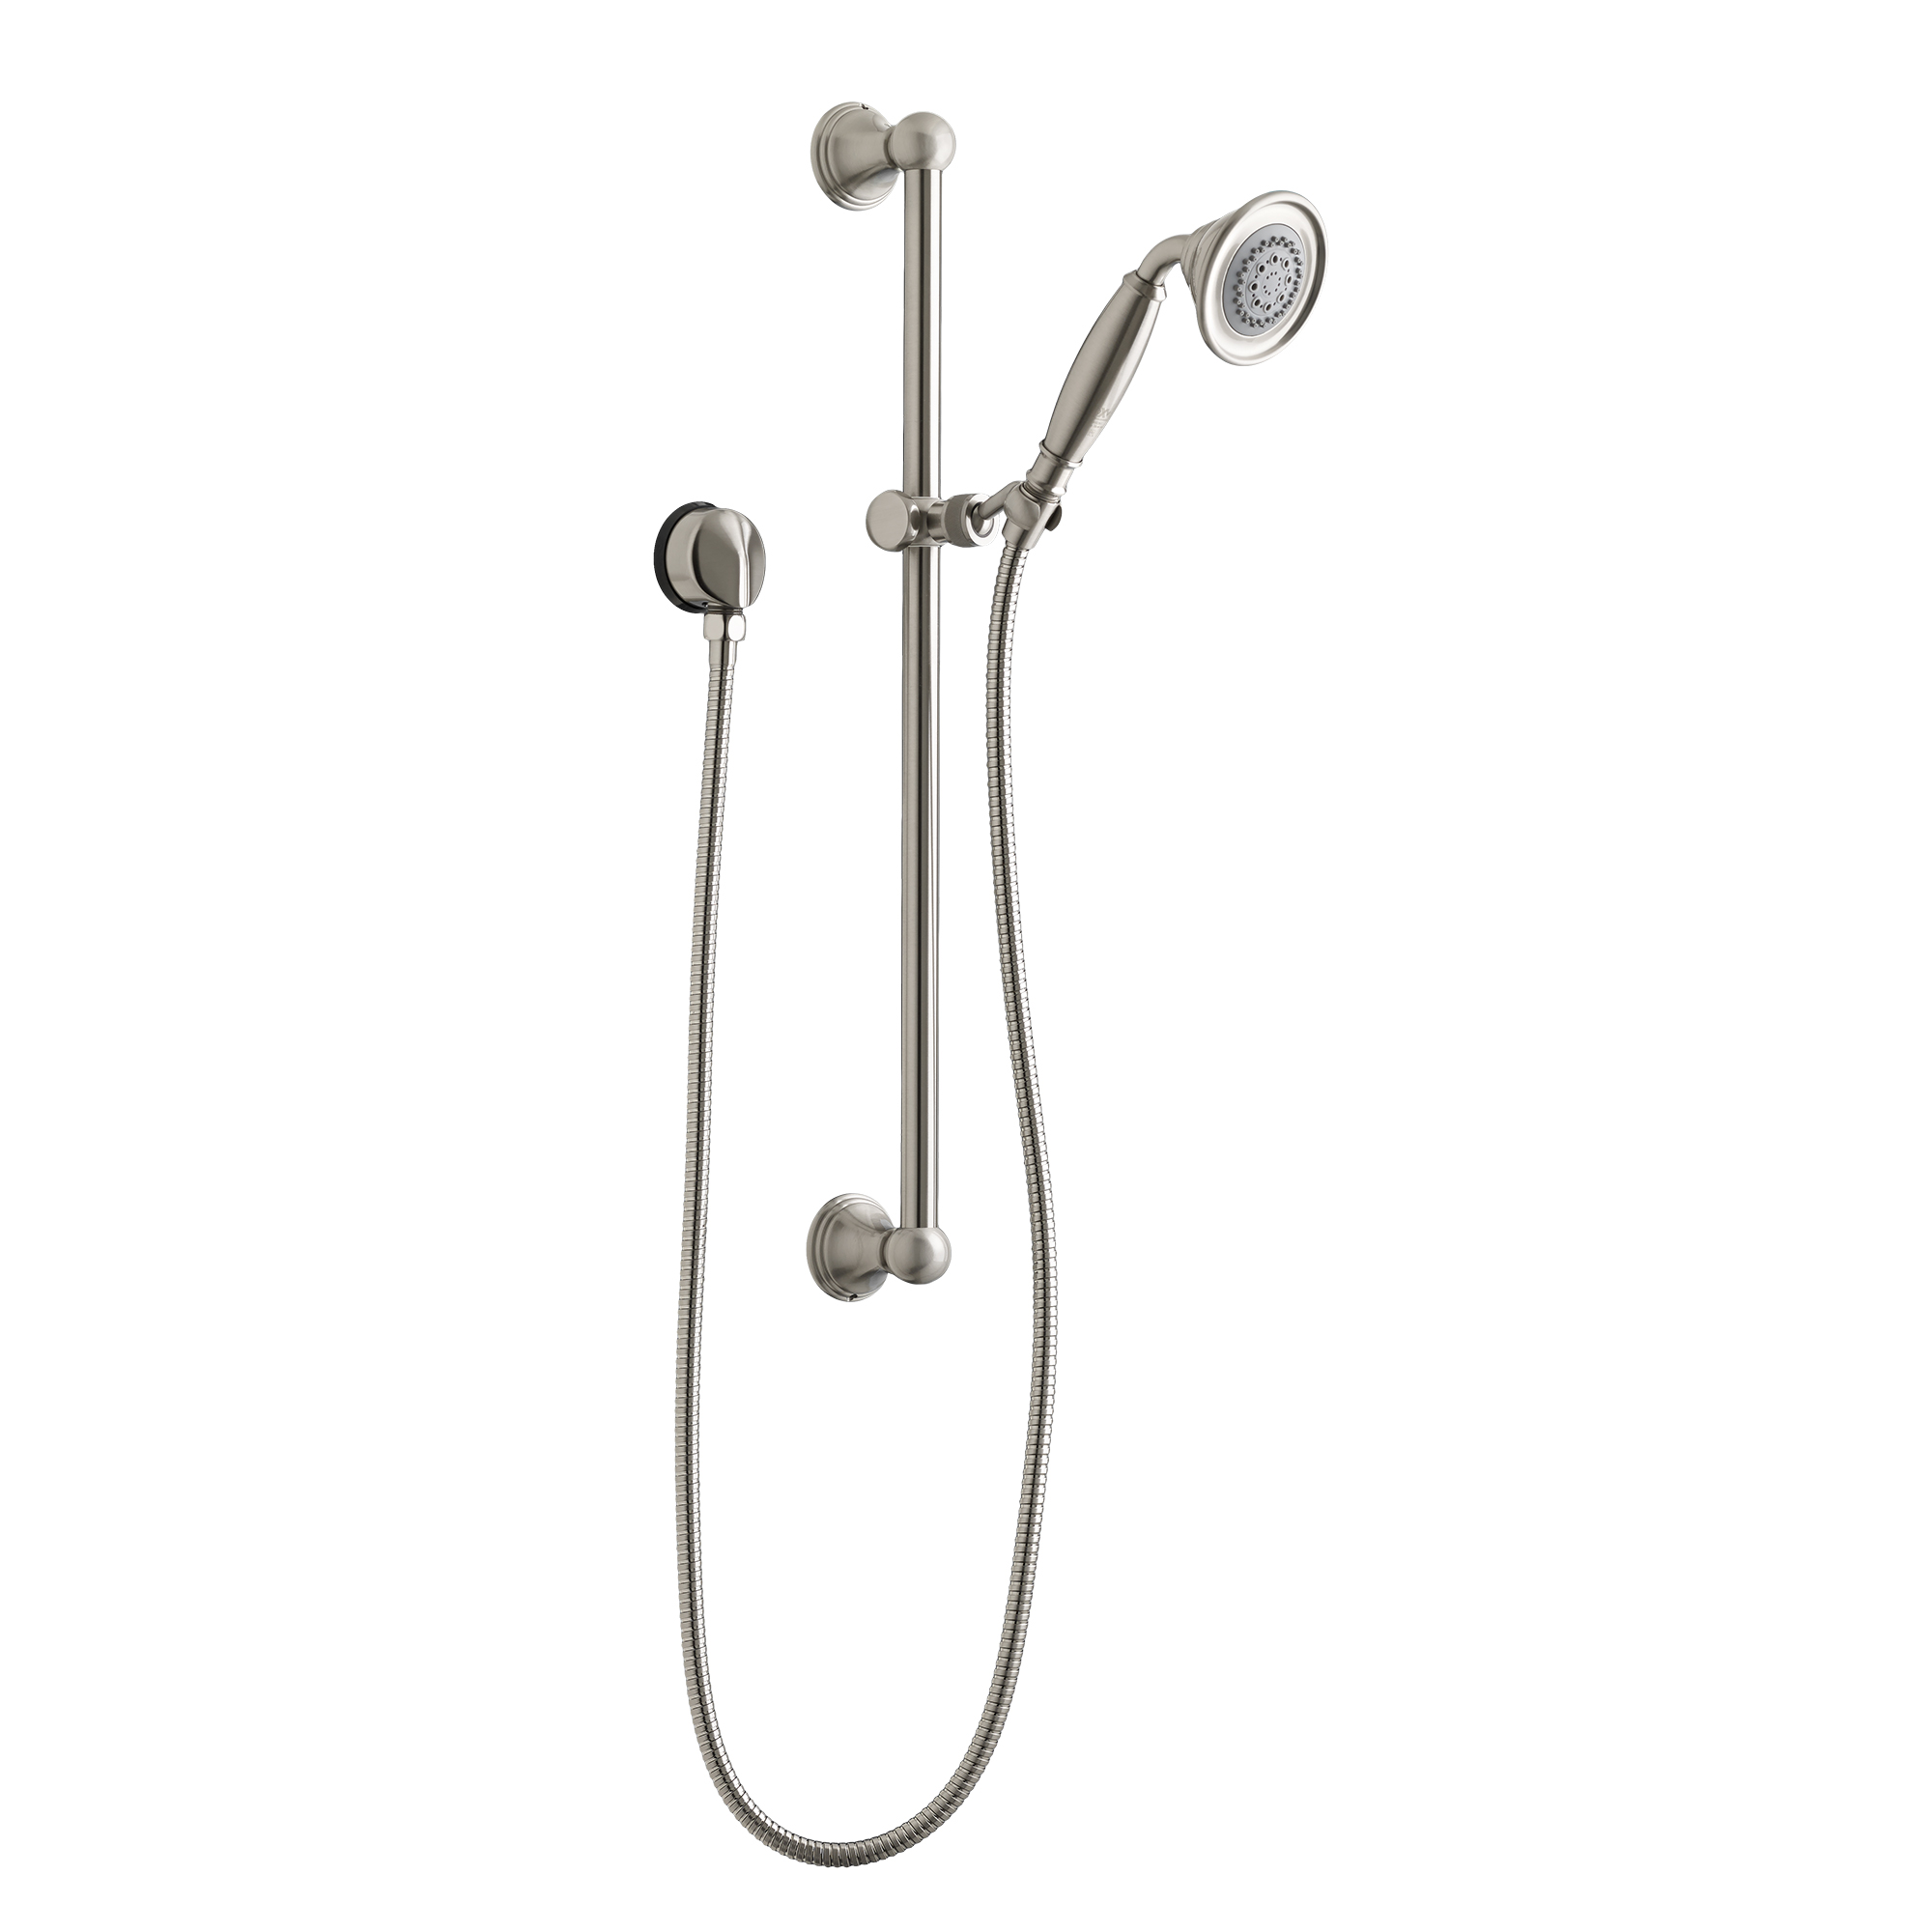 Ashbee Personal Shower Set with 2.0 gpm Hand Shower